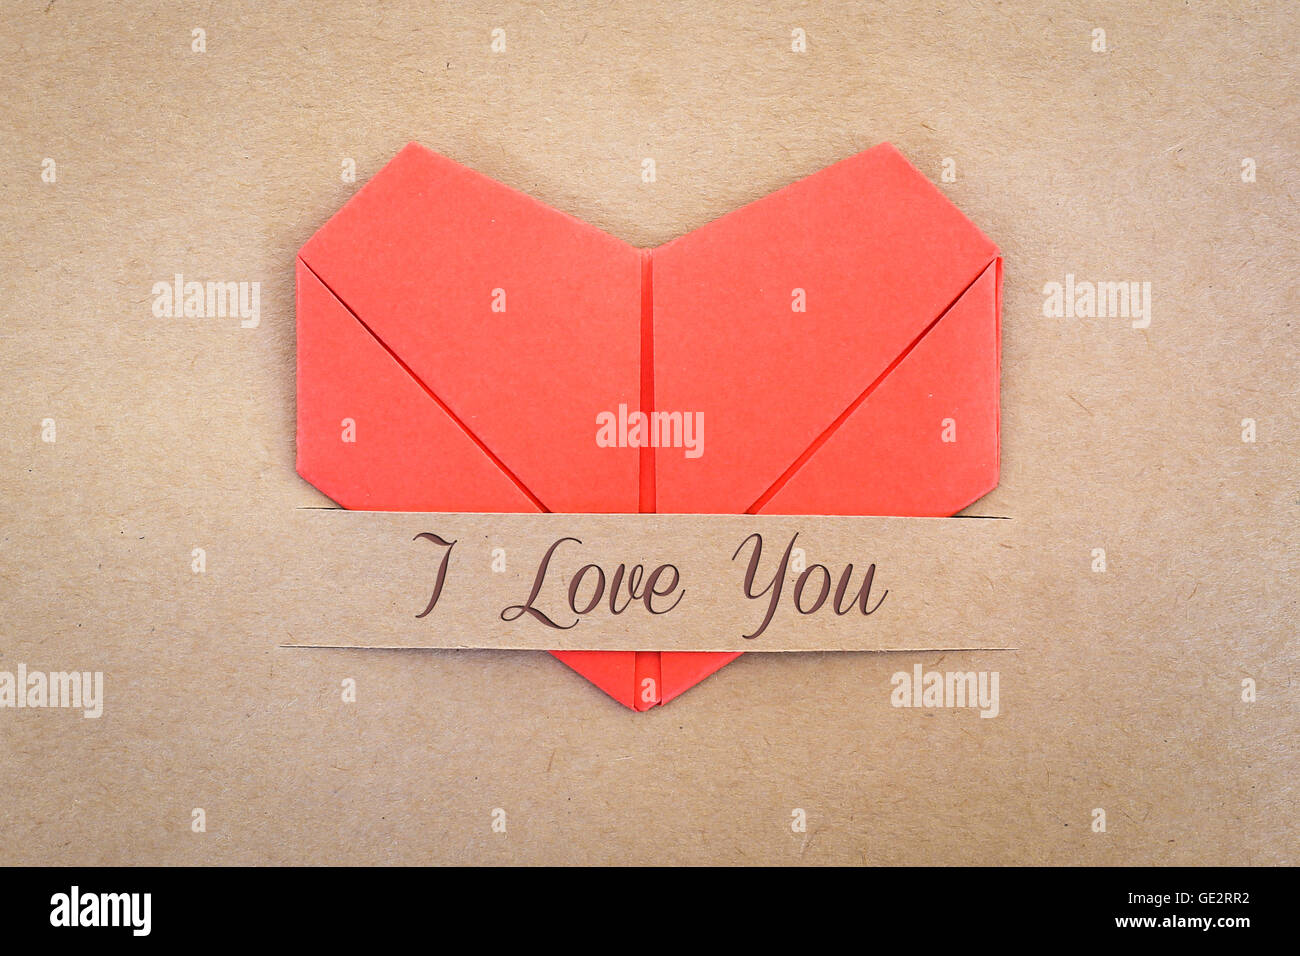 Valentine card, The red heart shape paper on brown with 'I love you' label Stock Photo